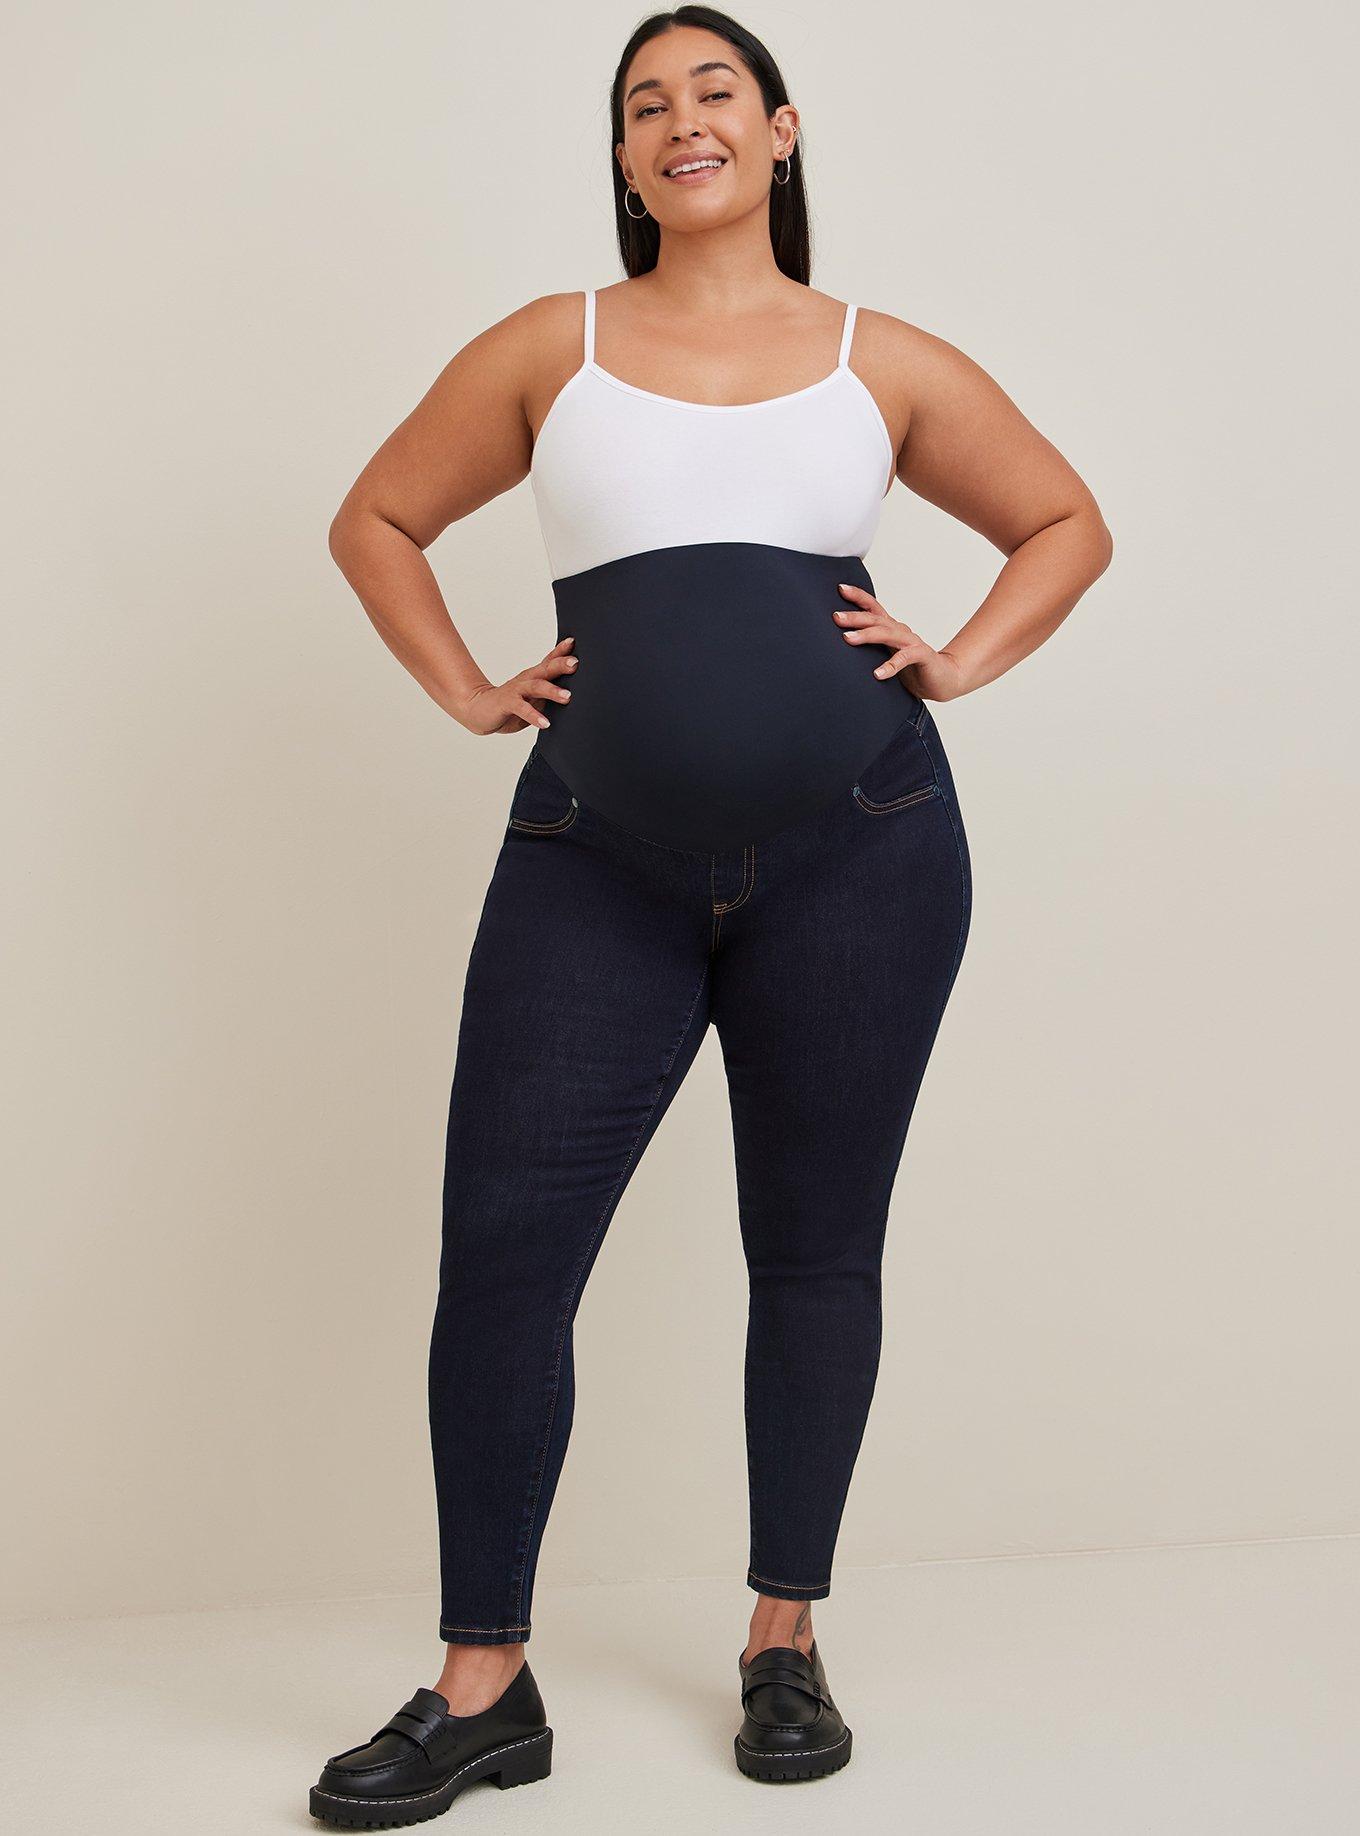 Torrid Maternity - A Size-Inclusive Maternity Option!